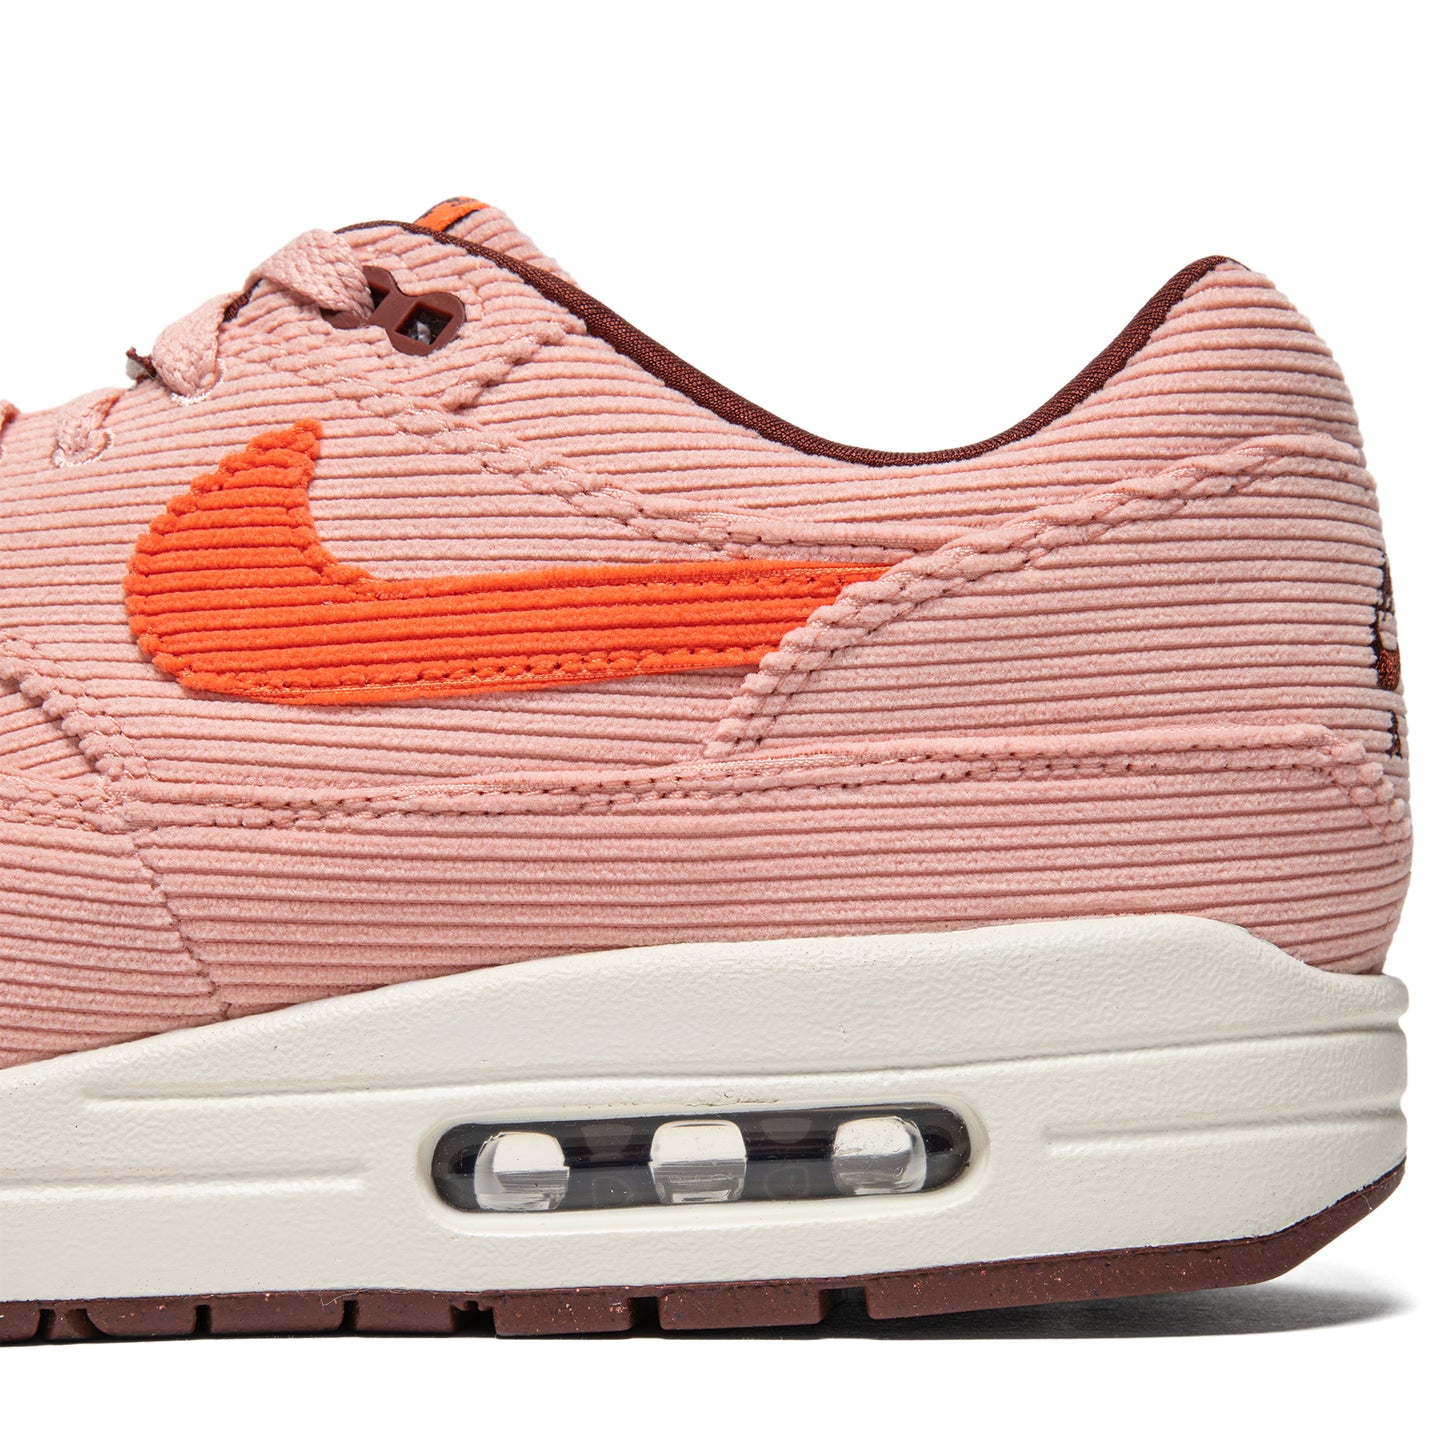 Nike Air Max 1 PRM (Coral Stardust/Bright Coral/Oxen Brown)